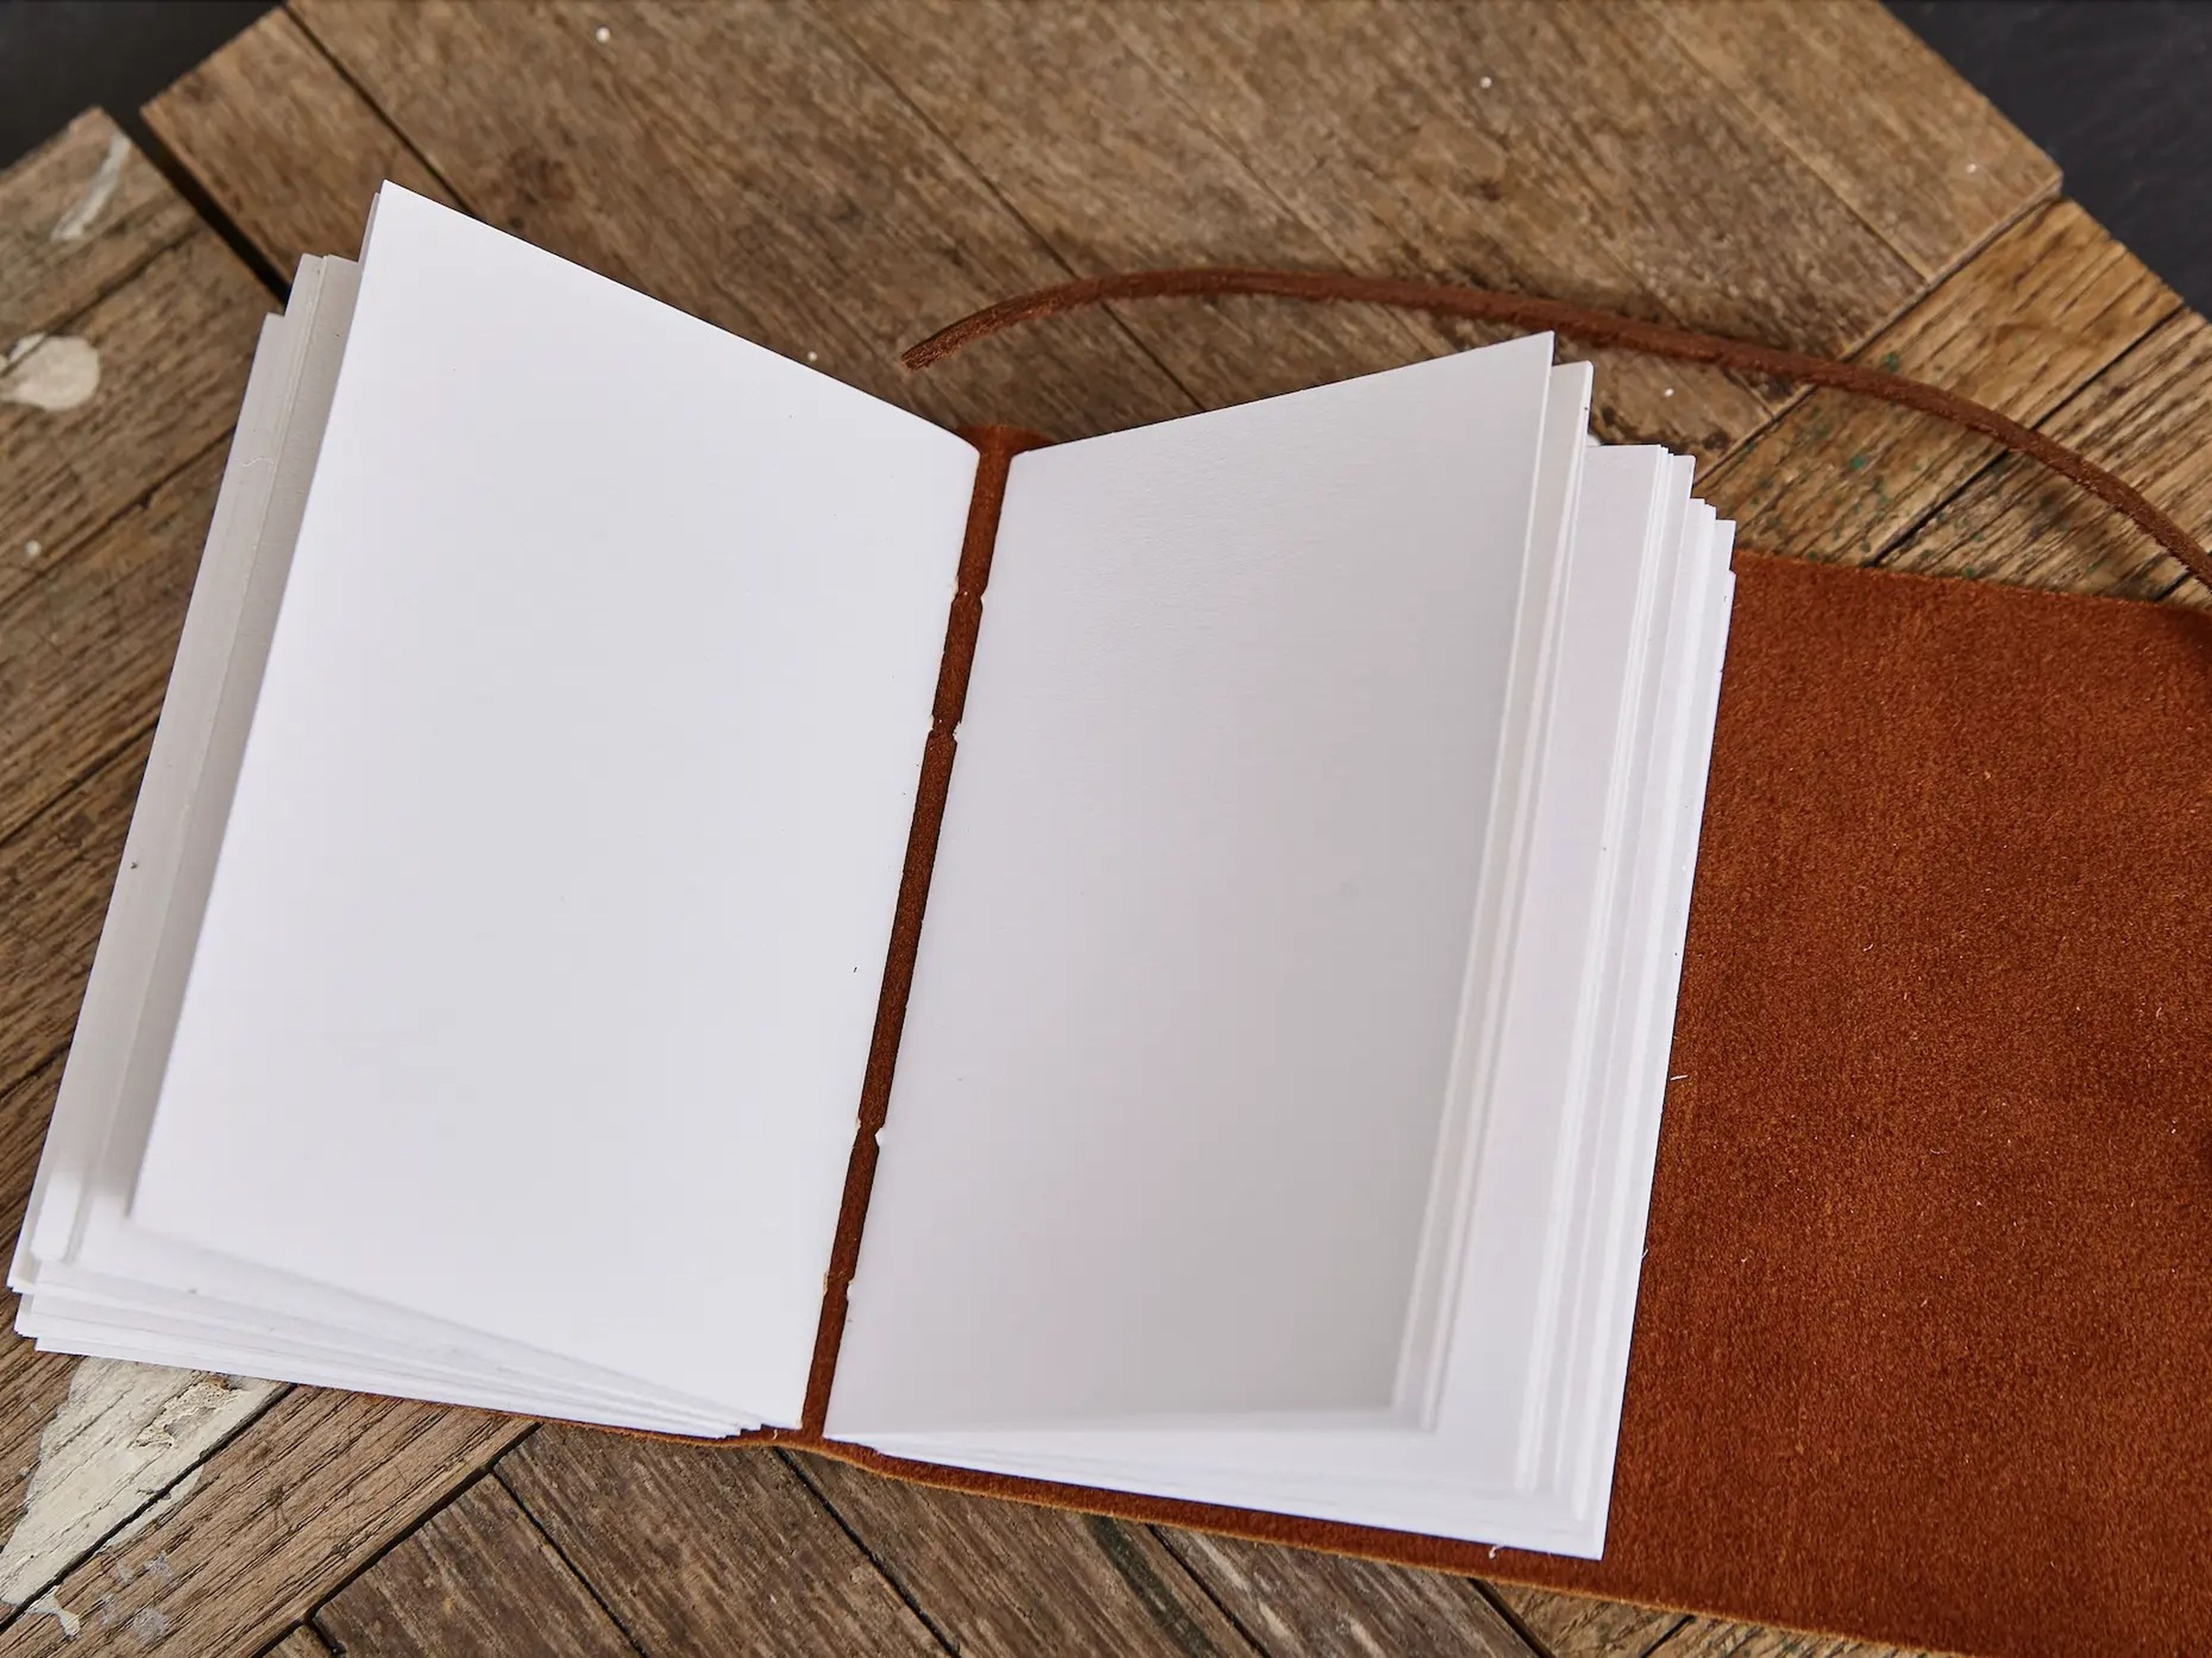 blank leather-bound journal sitting open on a wooden surface